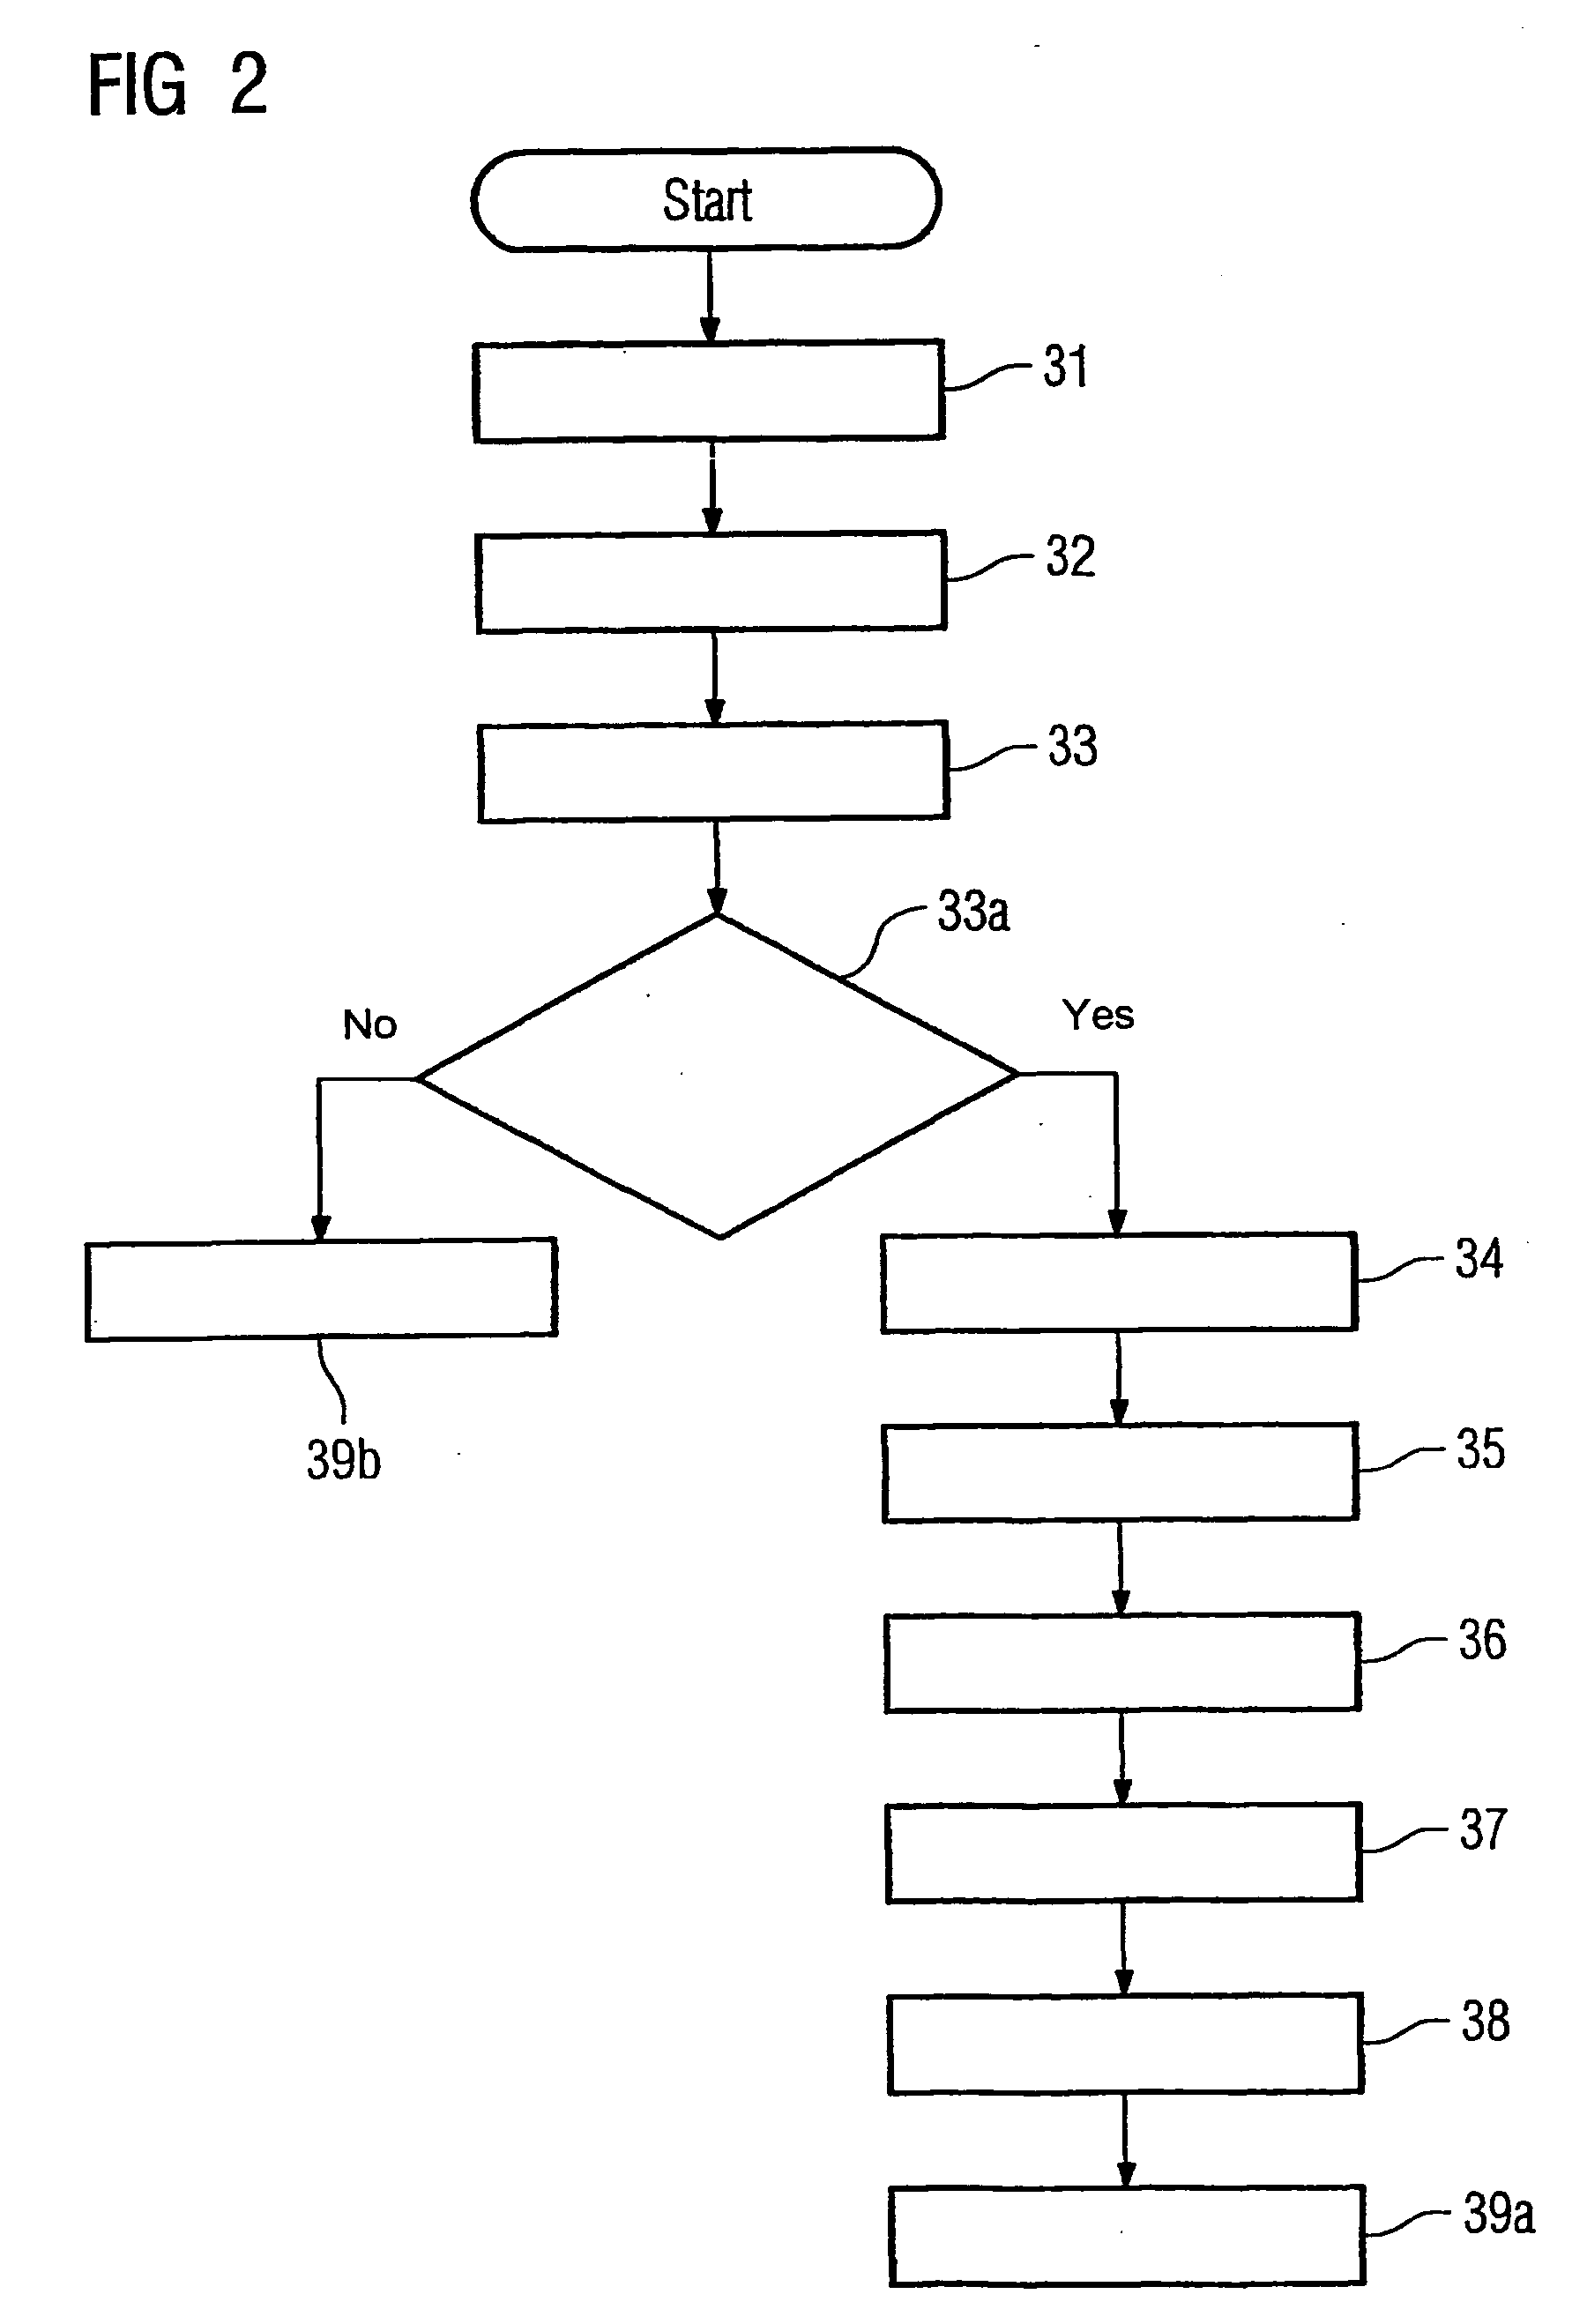 Method for increasing the capacity of an installation used to carry out an industrial process